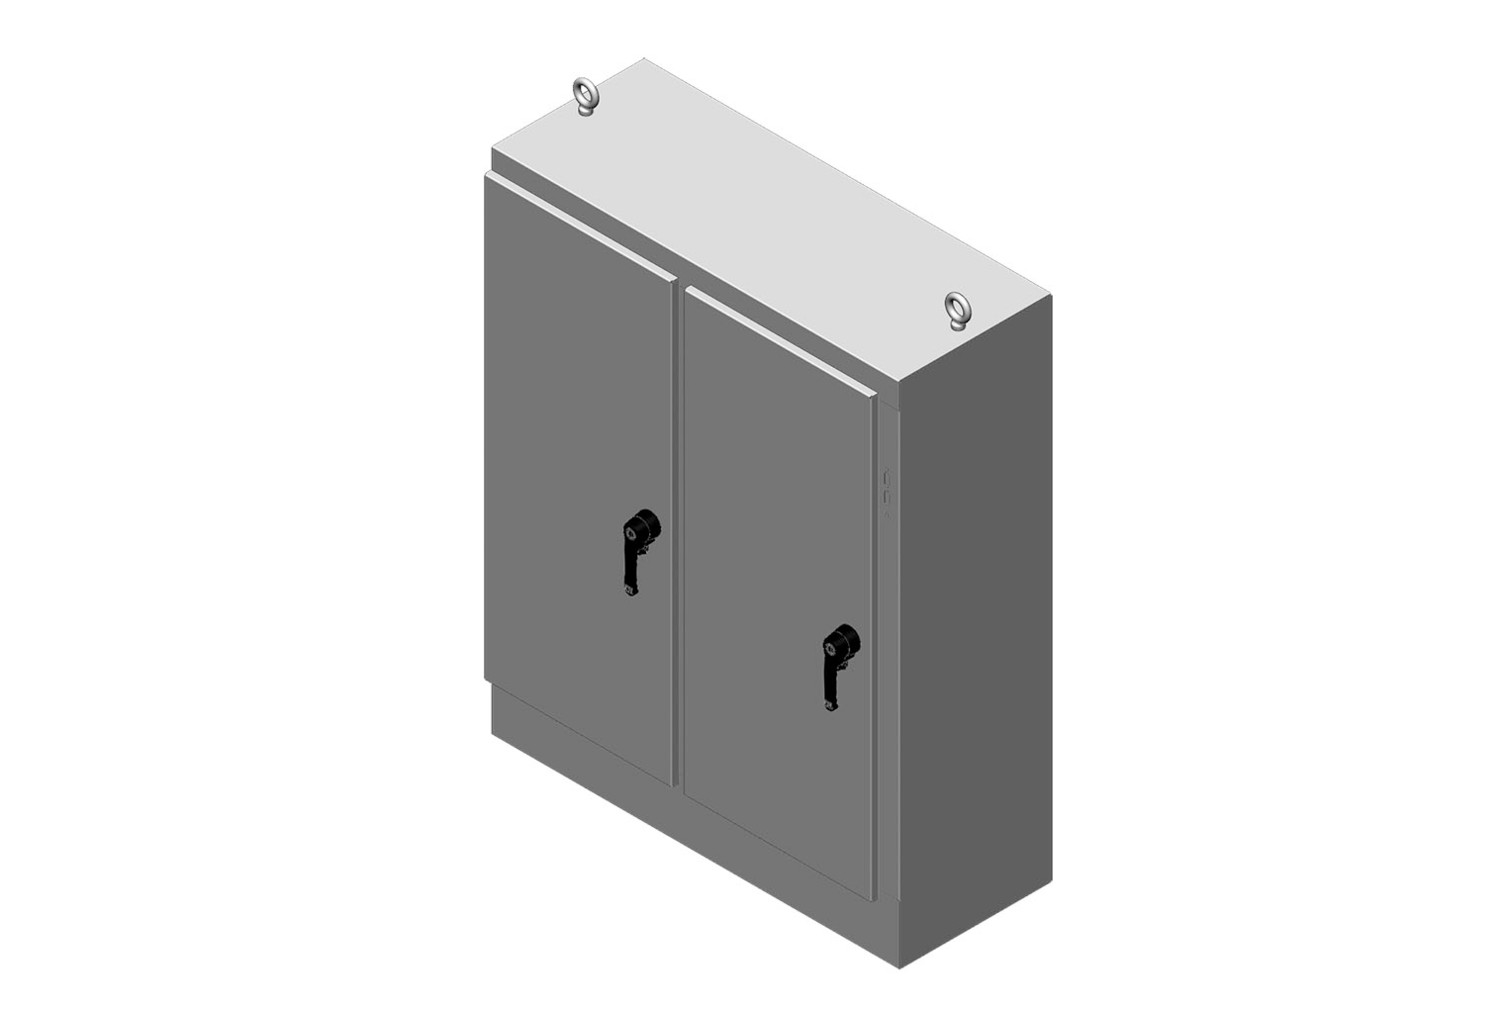 RMR Free-Standing Disconnect Enclosure, Type 4, with Solid Double Door - Image 3